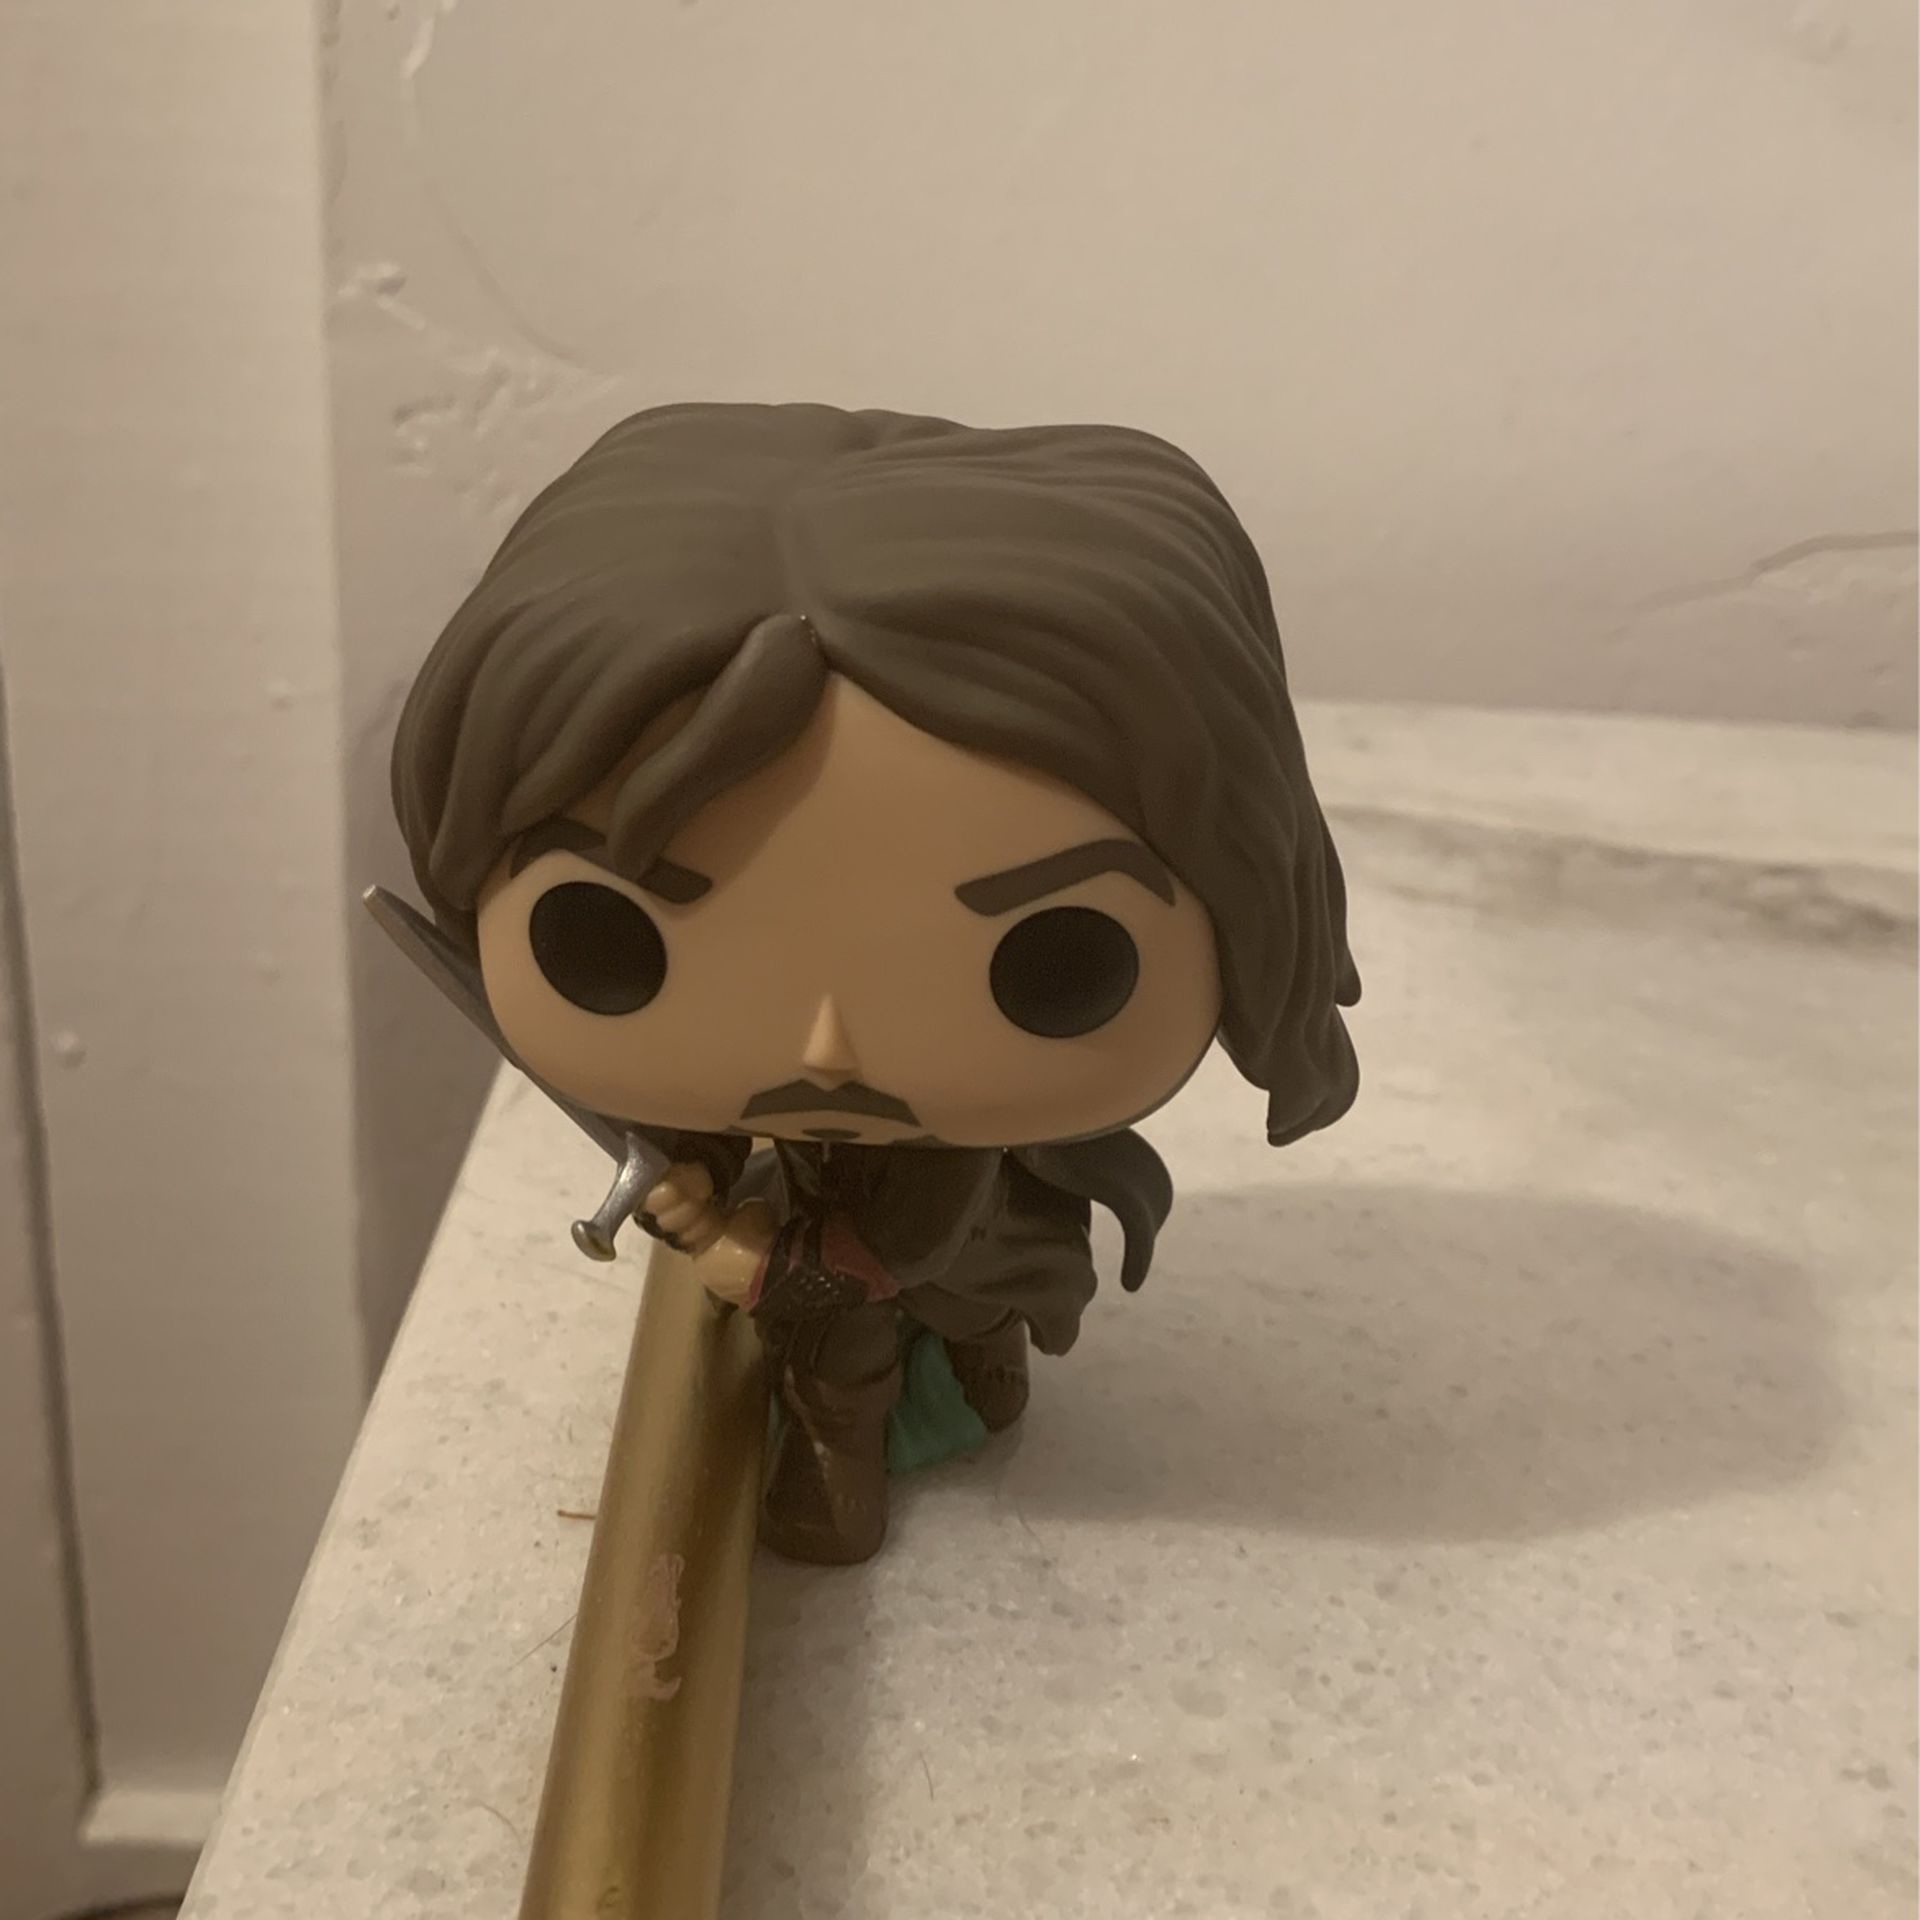 FUNKO POP! MOVIES SPECIALTY SERIES: Lord of the Rings - Aragorn (Army of the Dead) (FS)